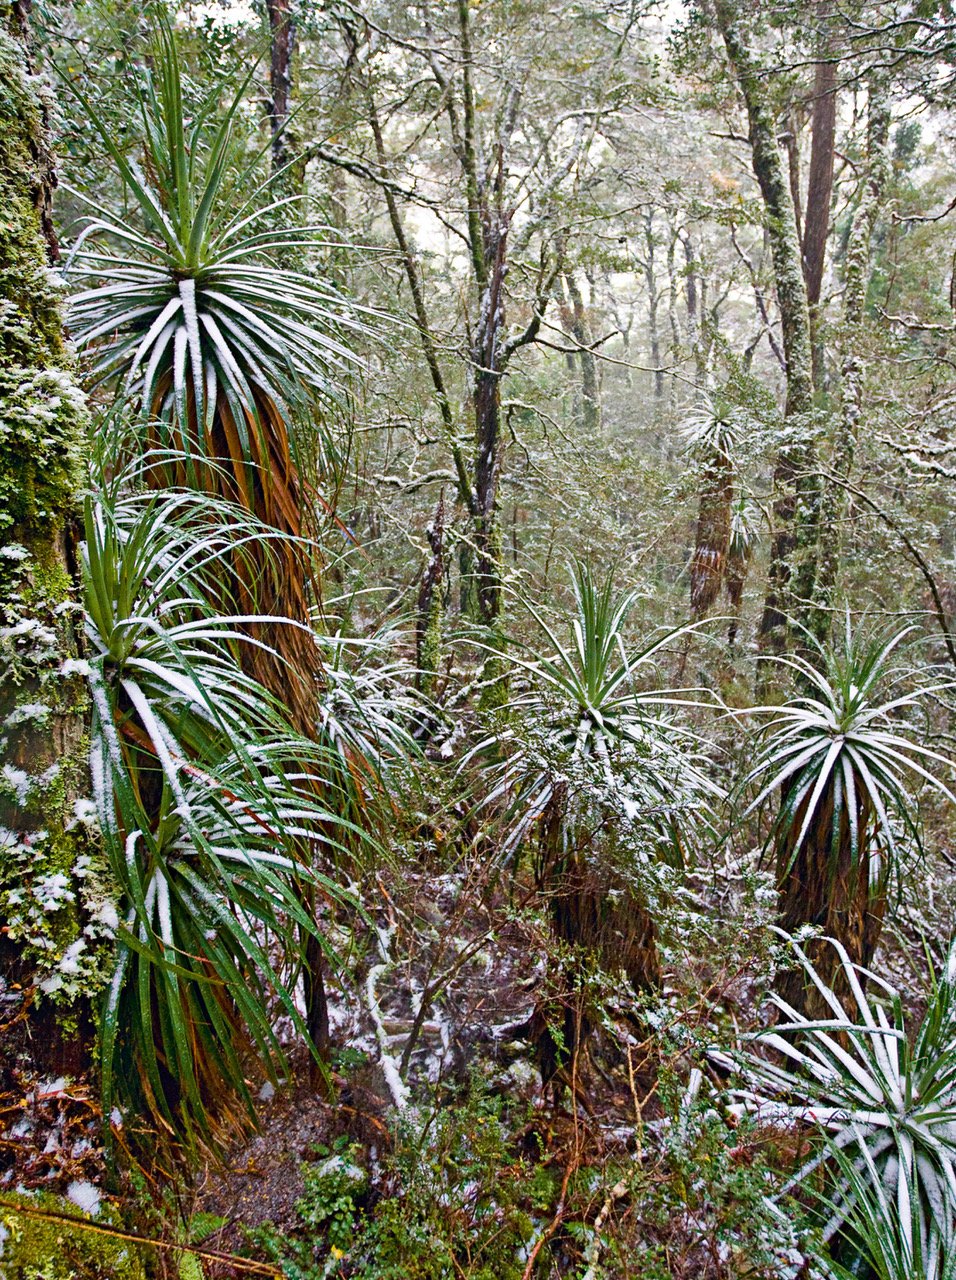 A group of dry plants with long leaves and bushes in a forest area, Cradle Mountain #23, Tasmania